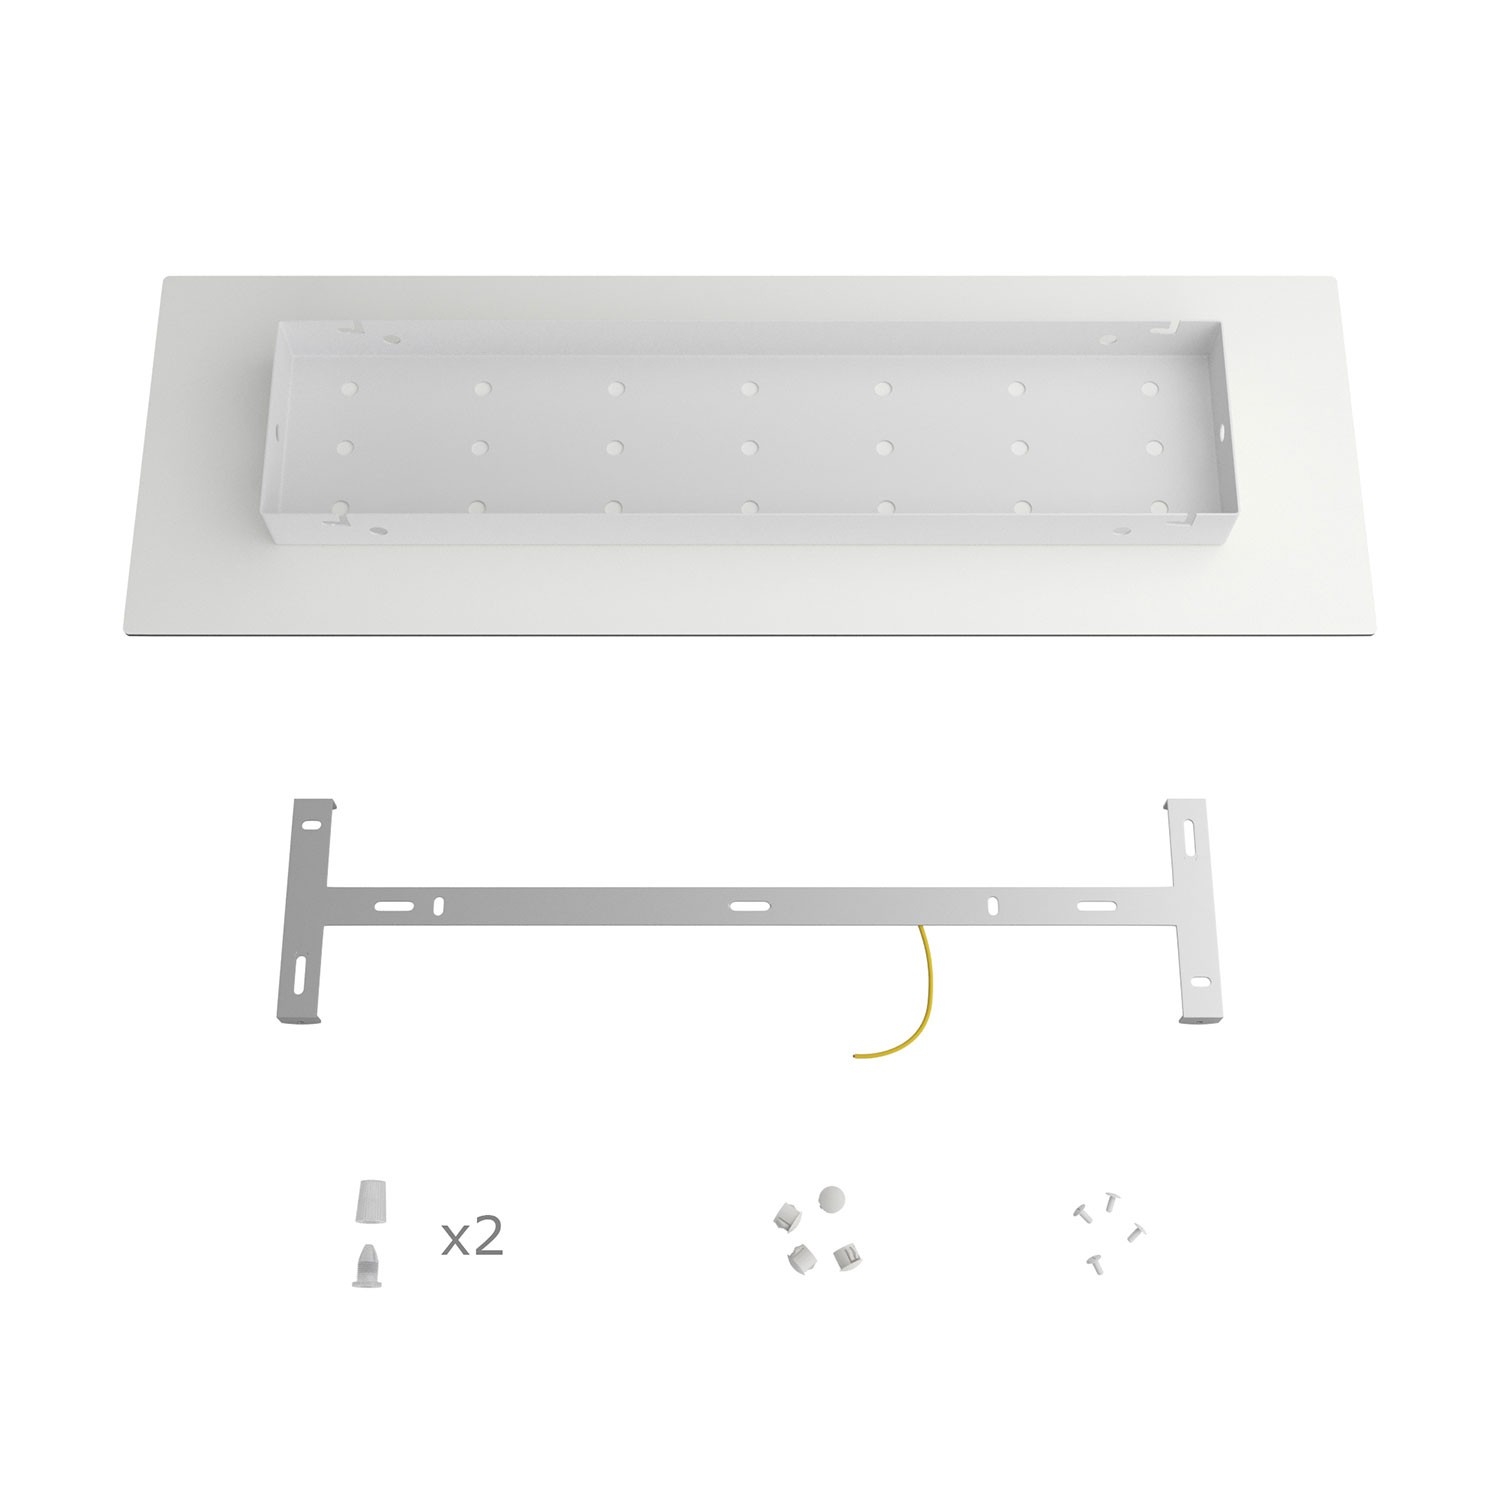 2 hole - EXTRA LARGE Rectangular Ceiling Canopy Kit - Rose One System, 675 x 225 mm Cover